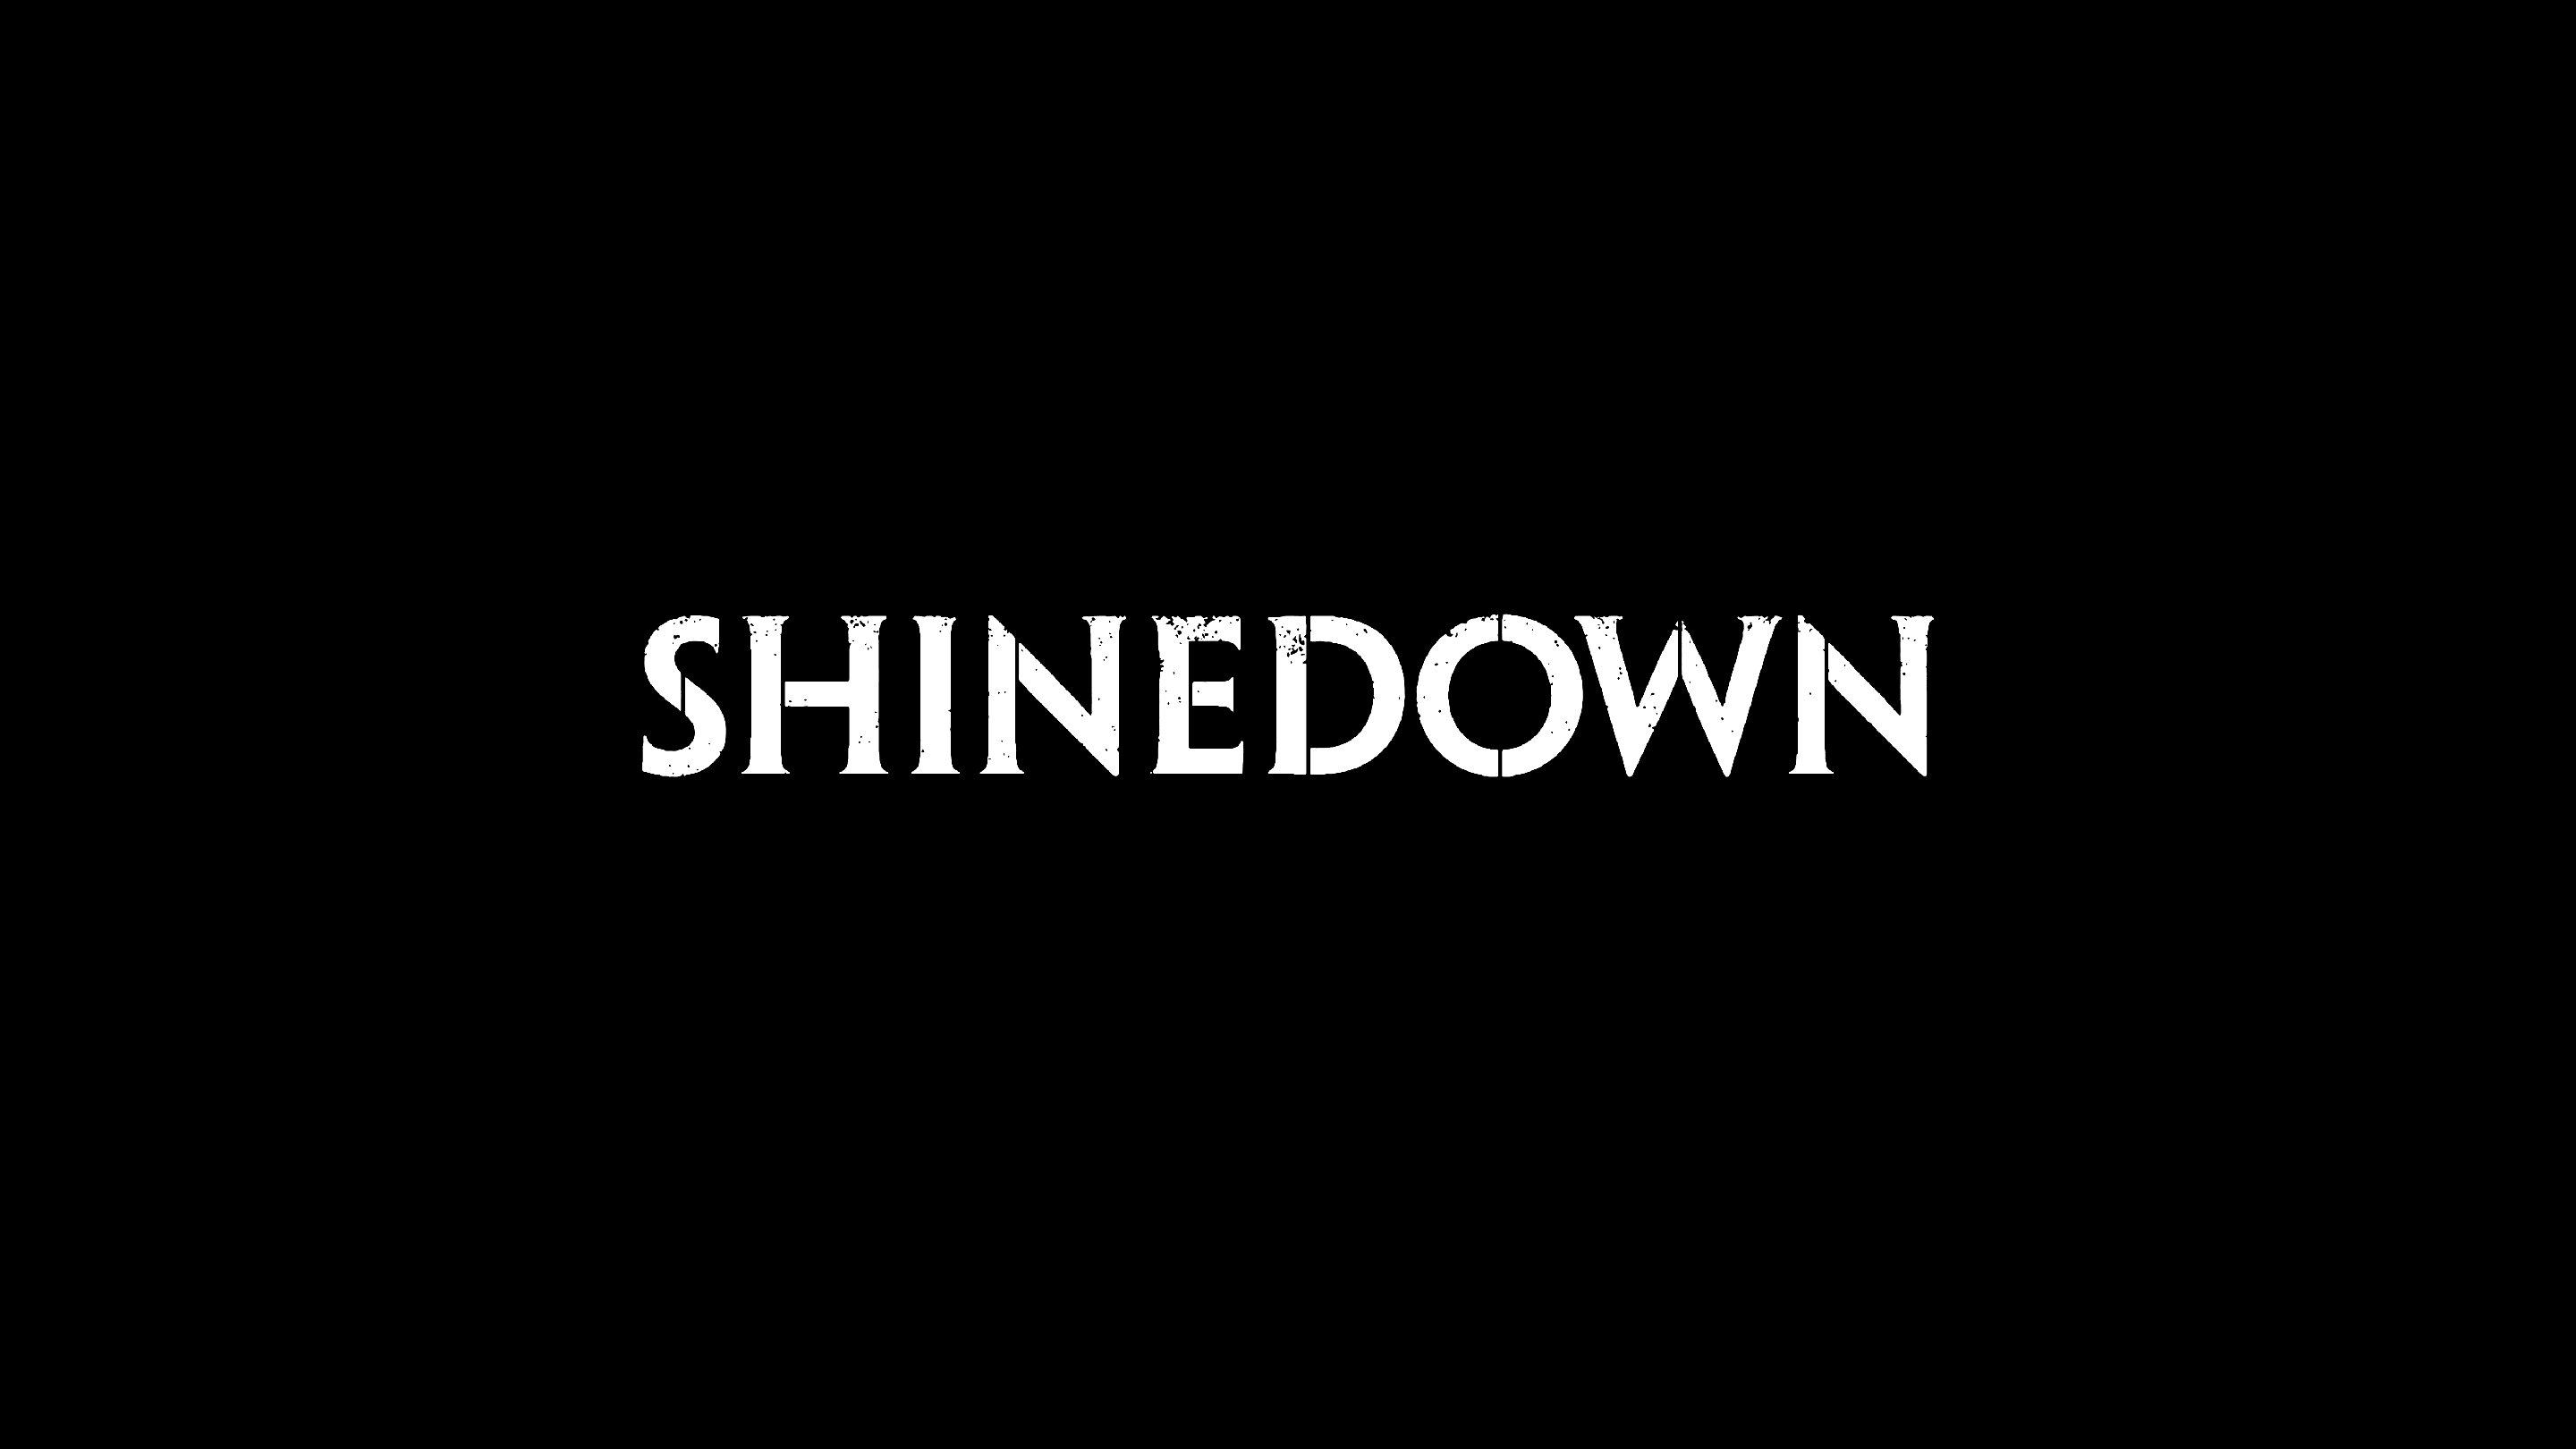 SHINEDOWN 'PLANET ZERO' LIMITED EDITION DELUXE HOCKEY JERSEY - AUTOGRA –  PUCK HCKY